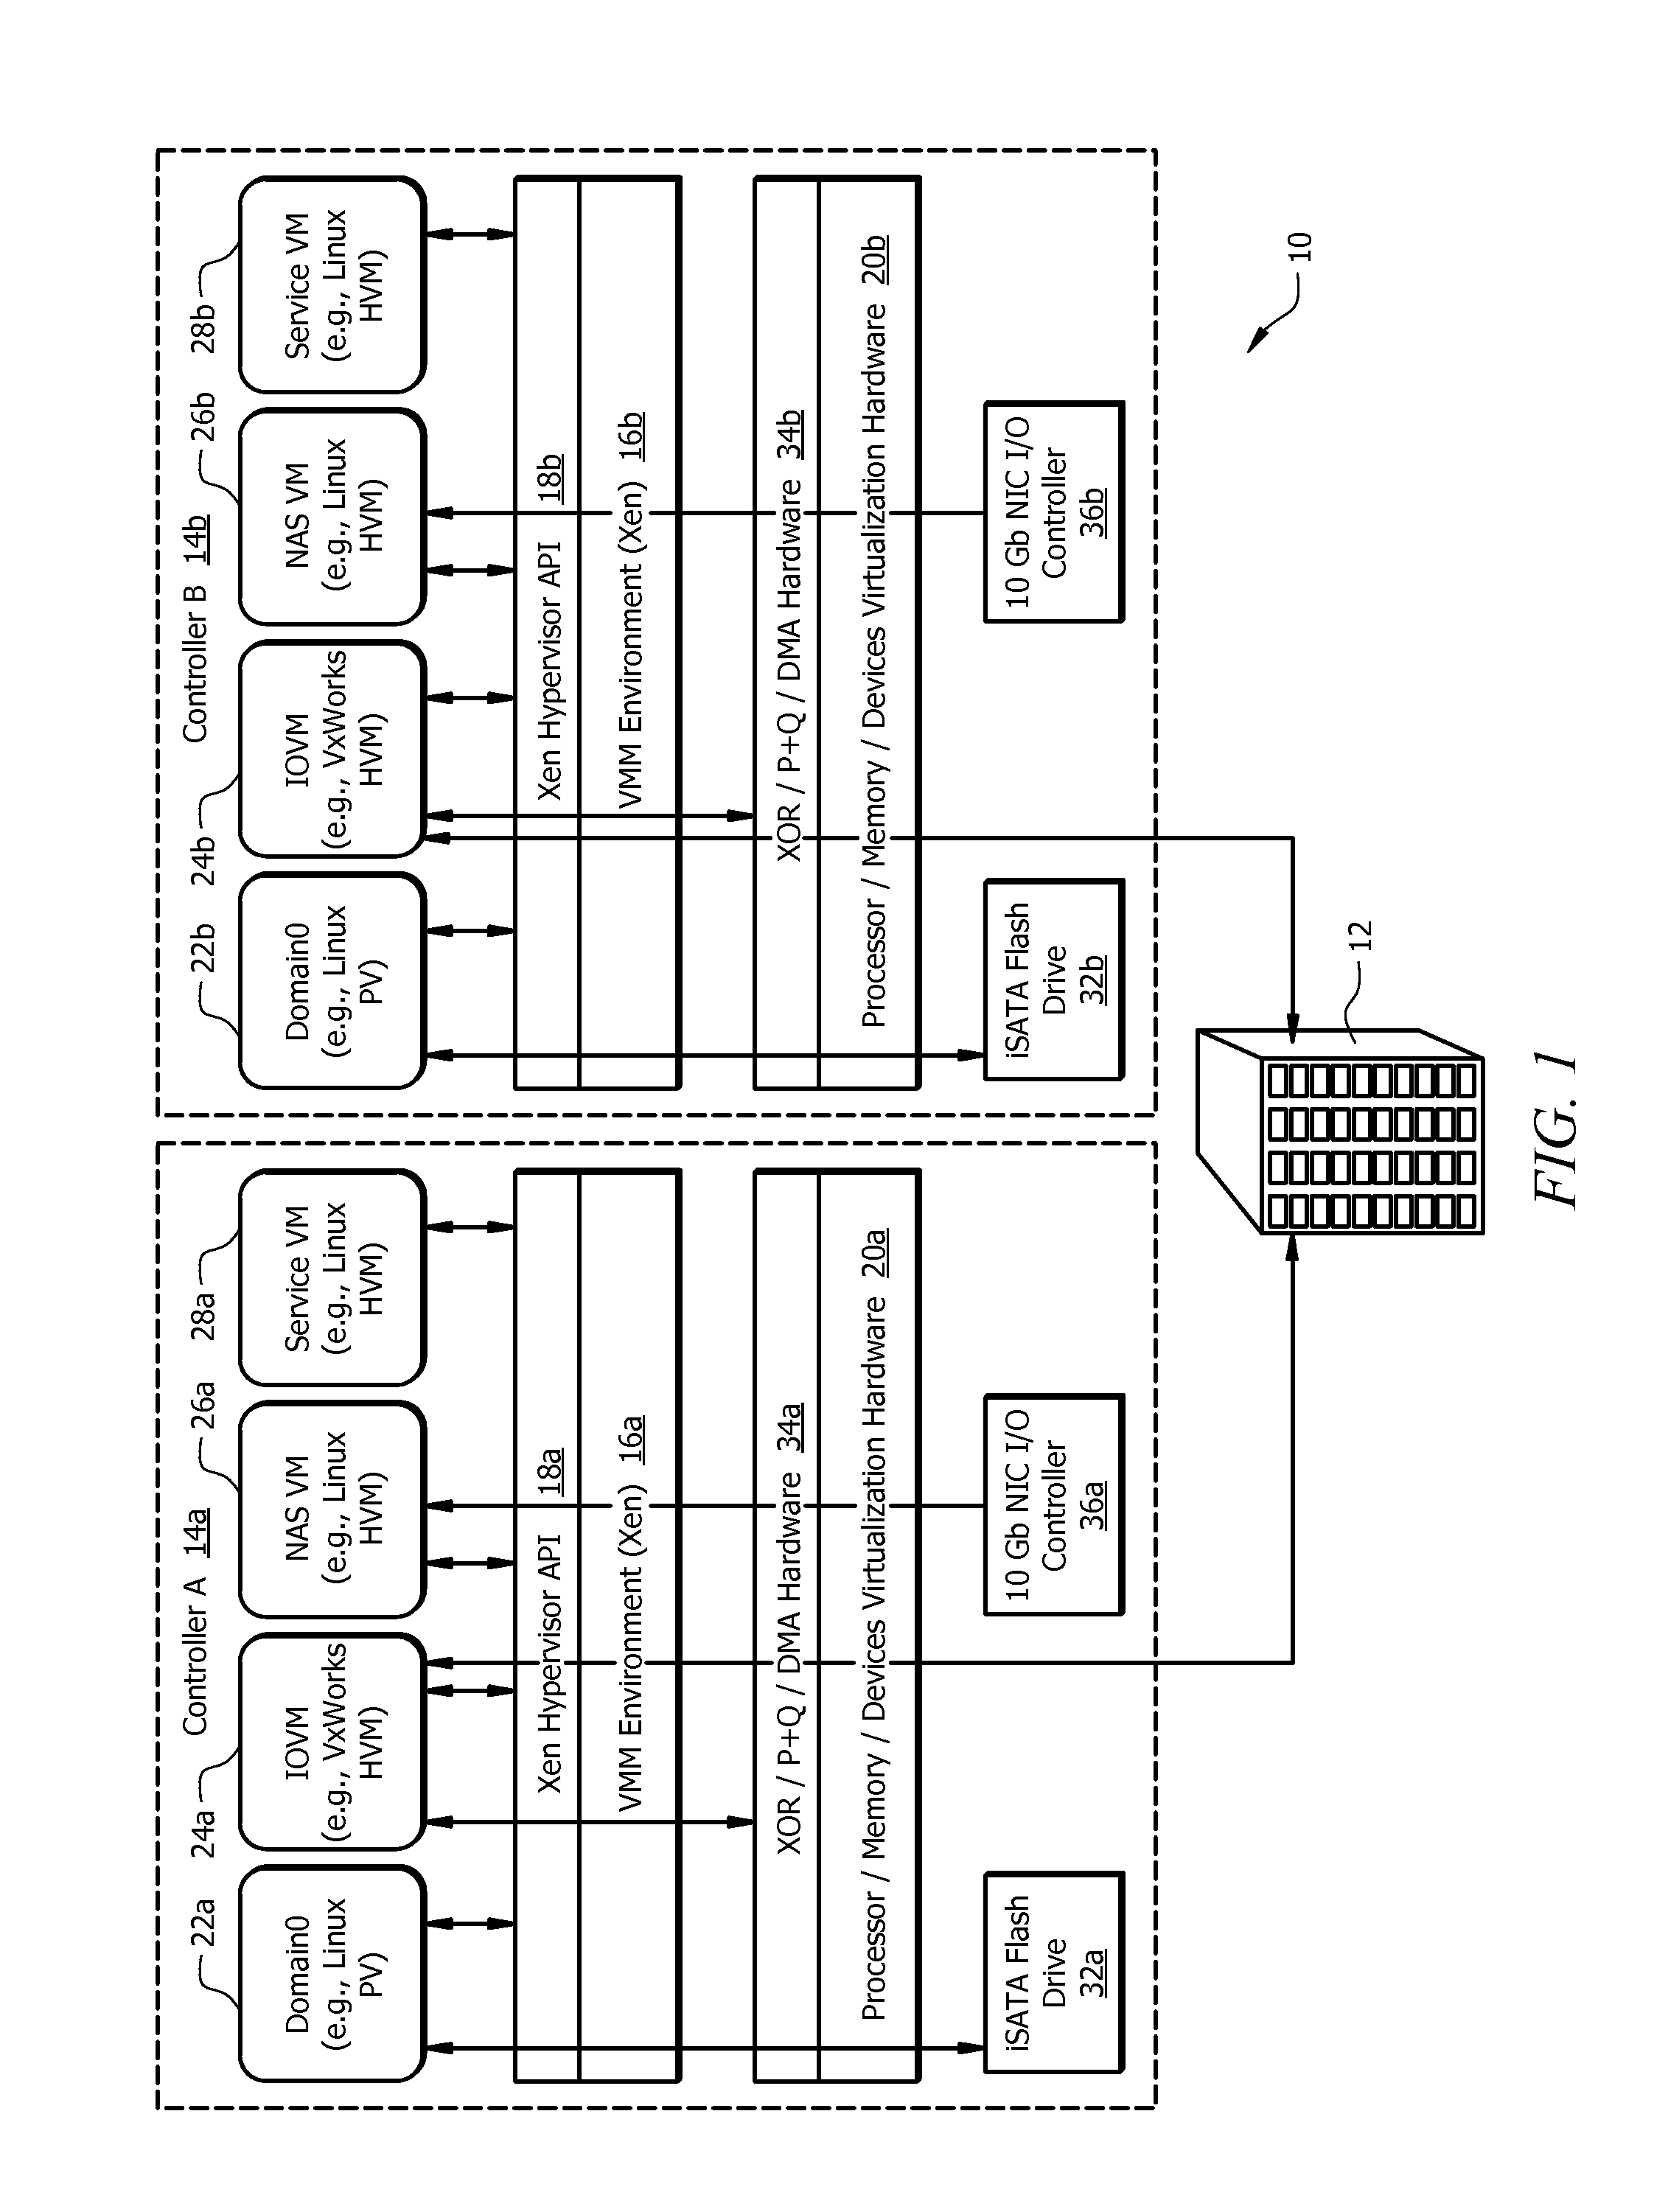 Method and system for firmware rollback of a storage device in a storage virtualization environment